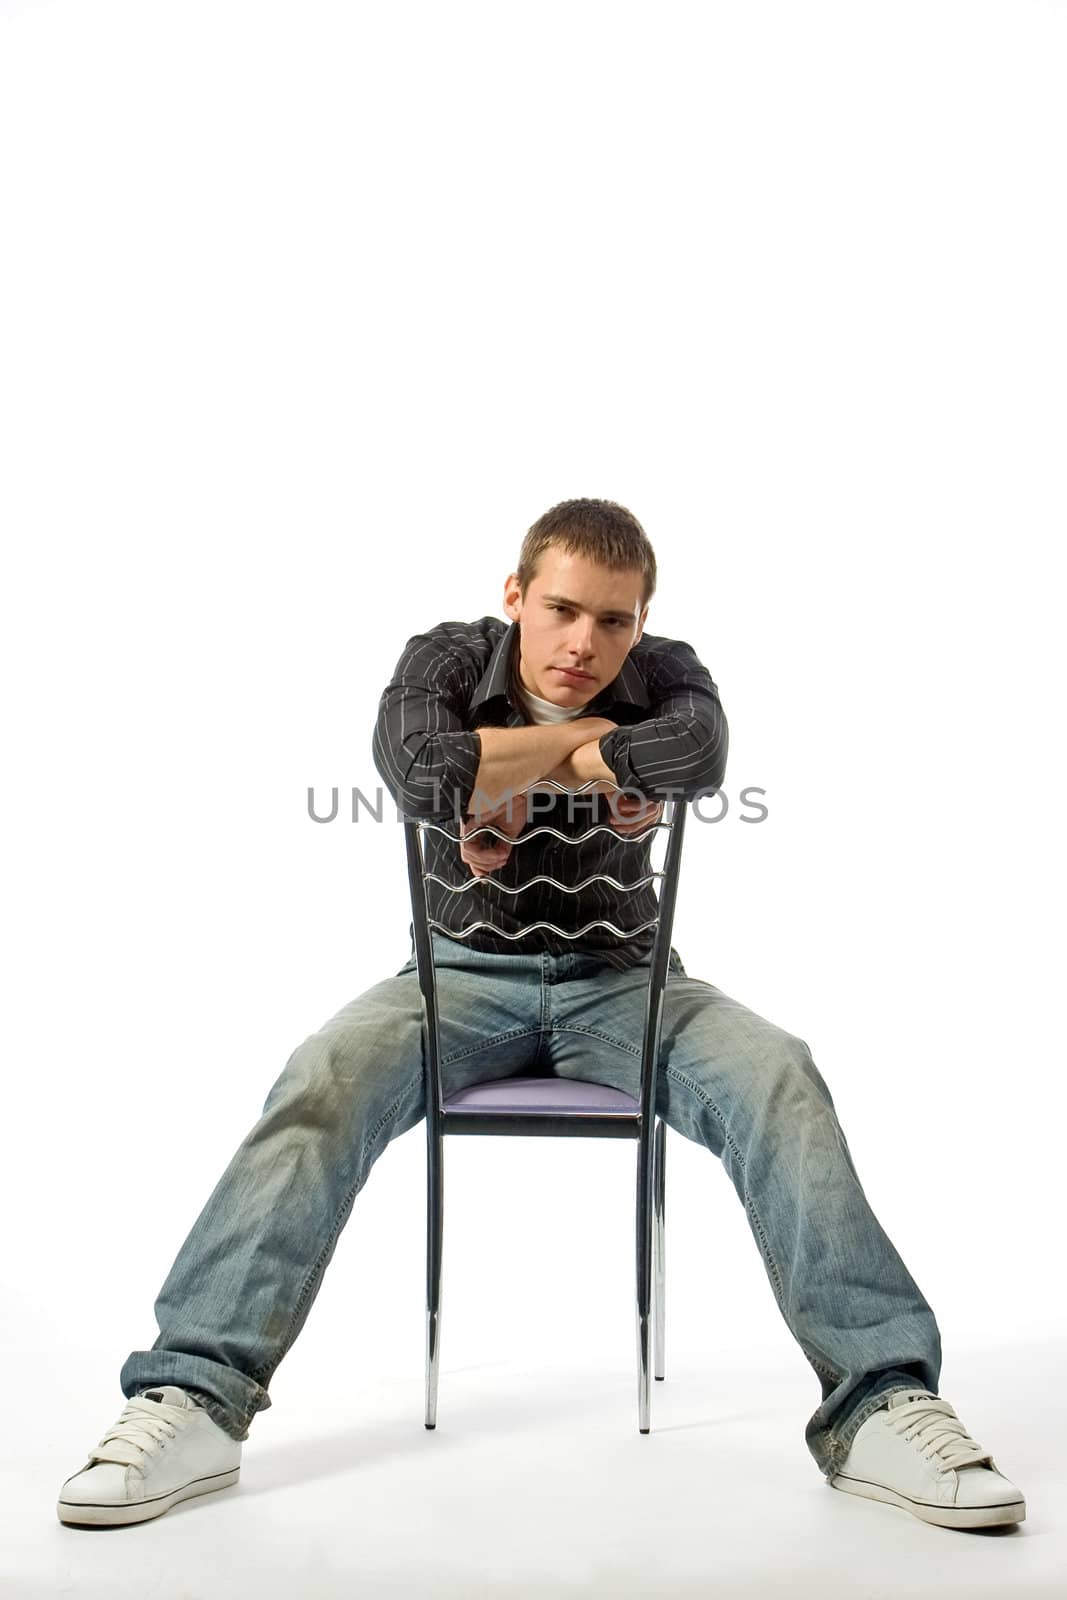 The thoughtful young man on a chair